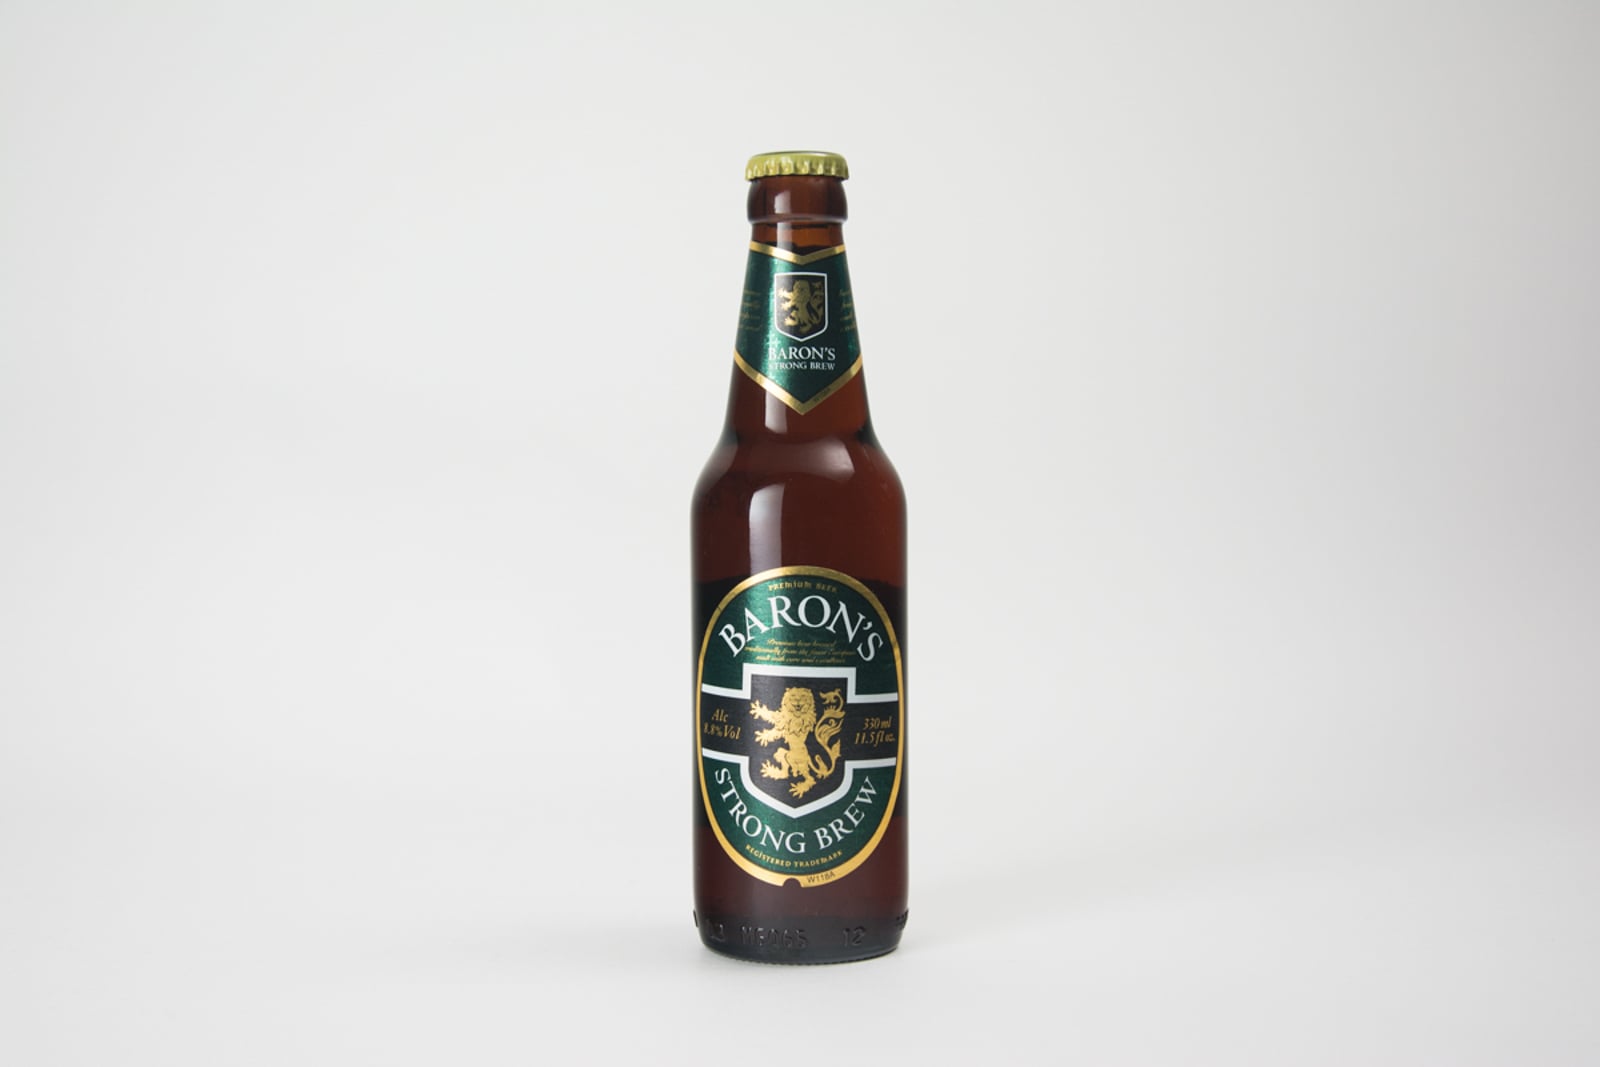 Baron's Strong Brew Beer Bottle, 330 ml